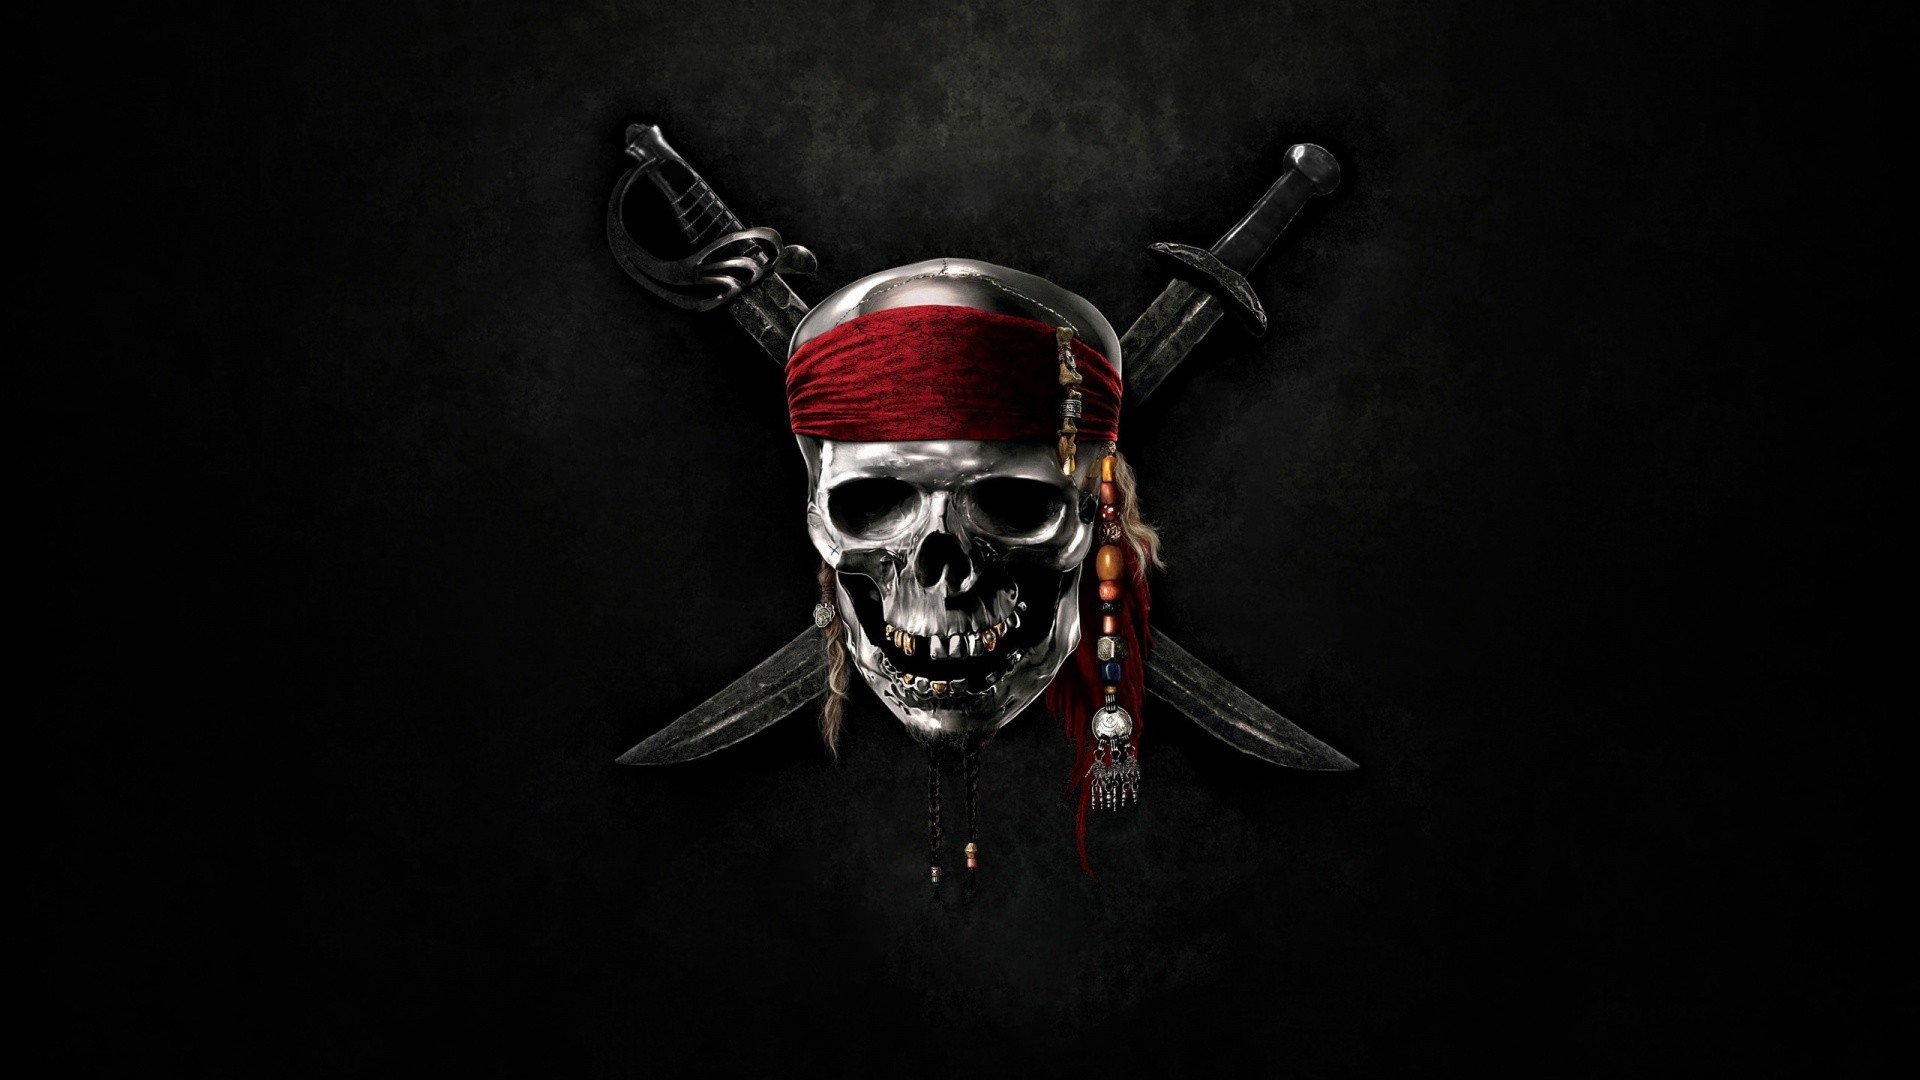 1920x1080 Jolly Roger Pirate King Pirates Of The Caribbean On Stranger Tides Skull  And Crossbones